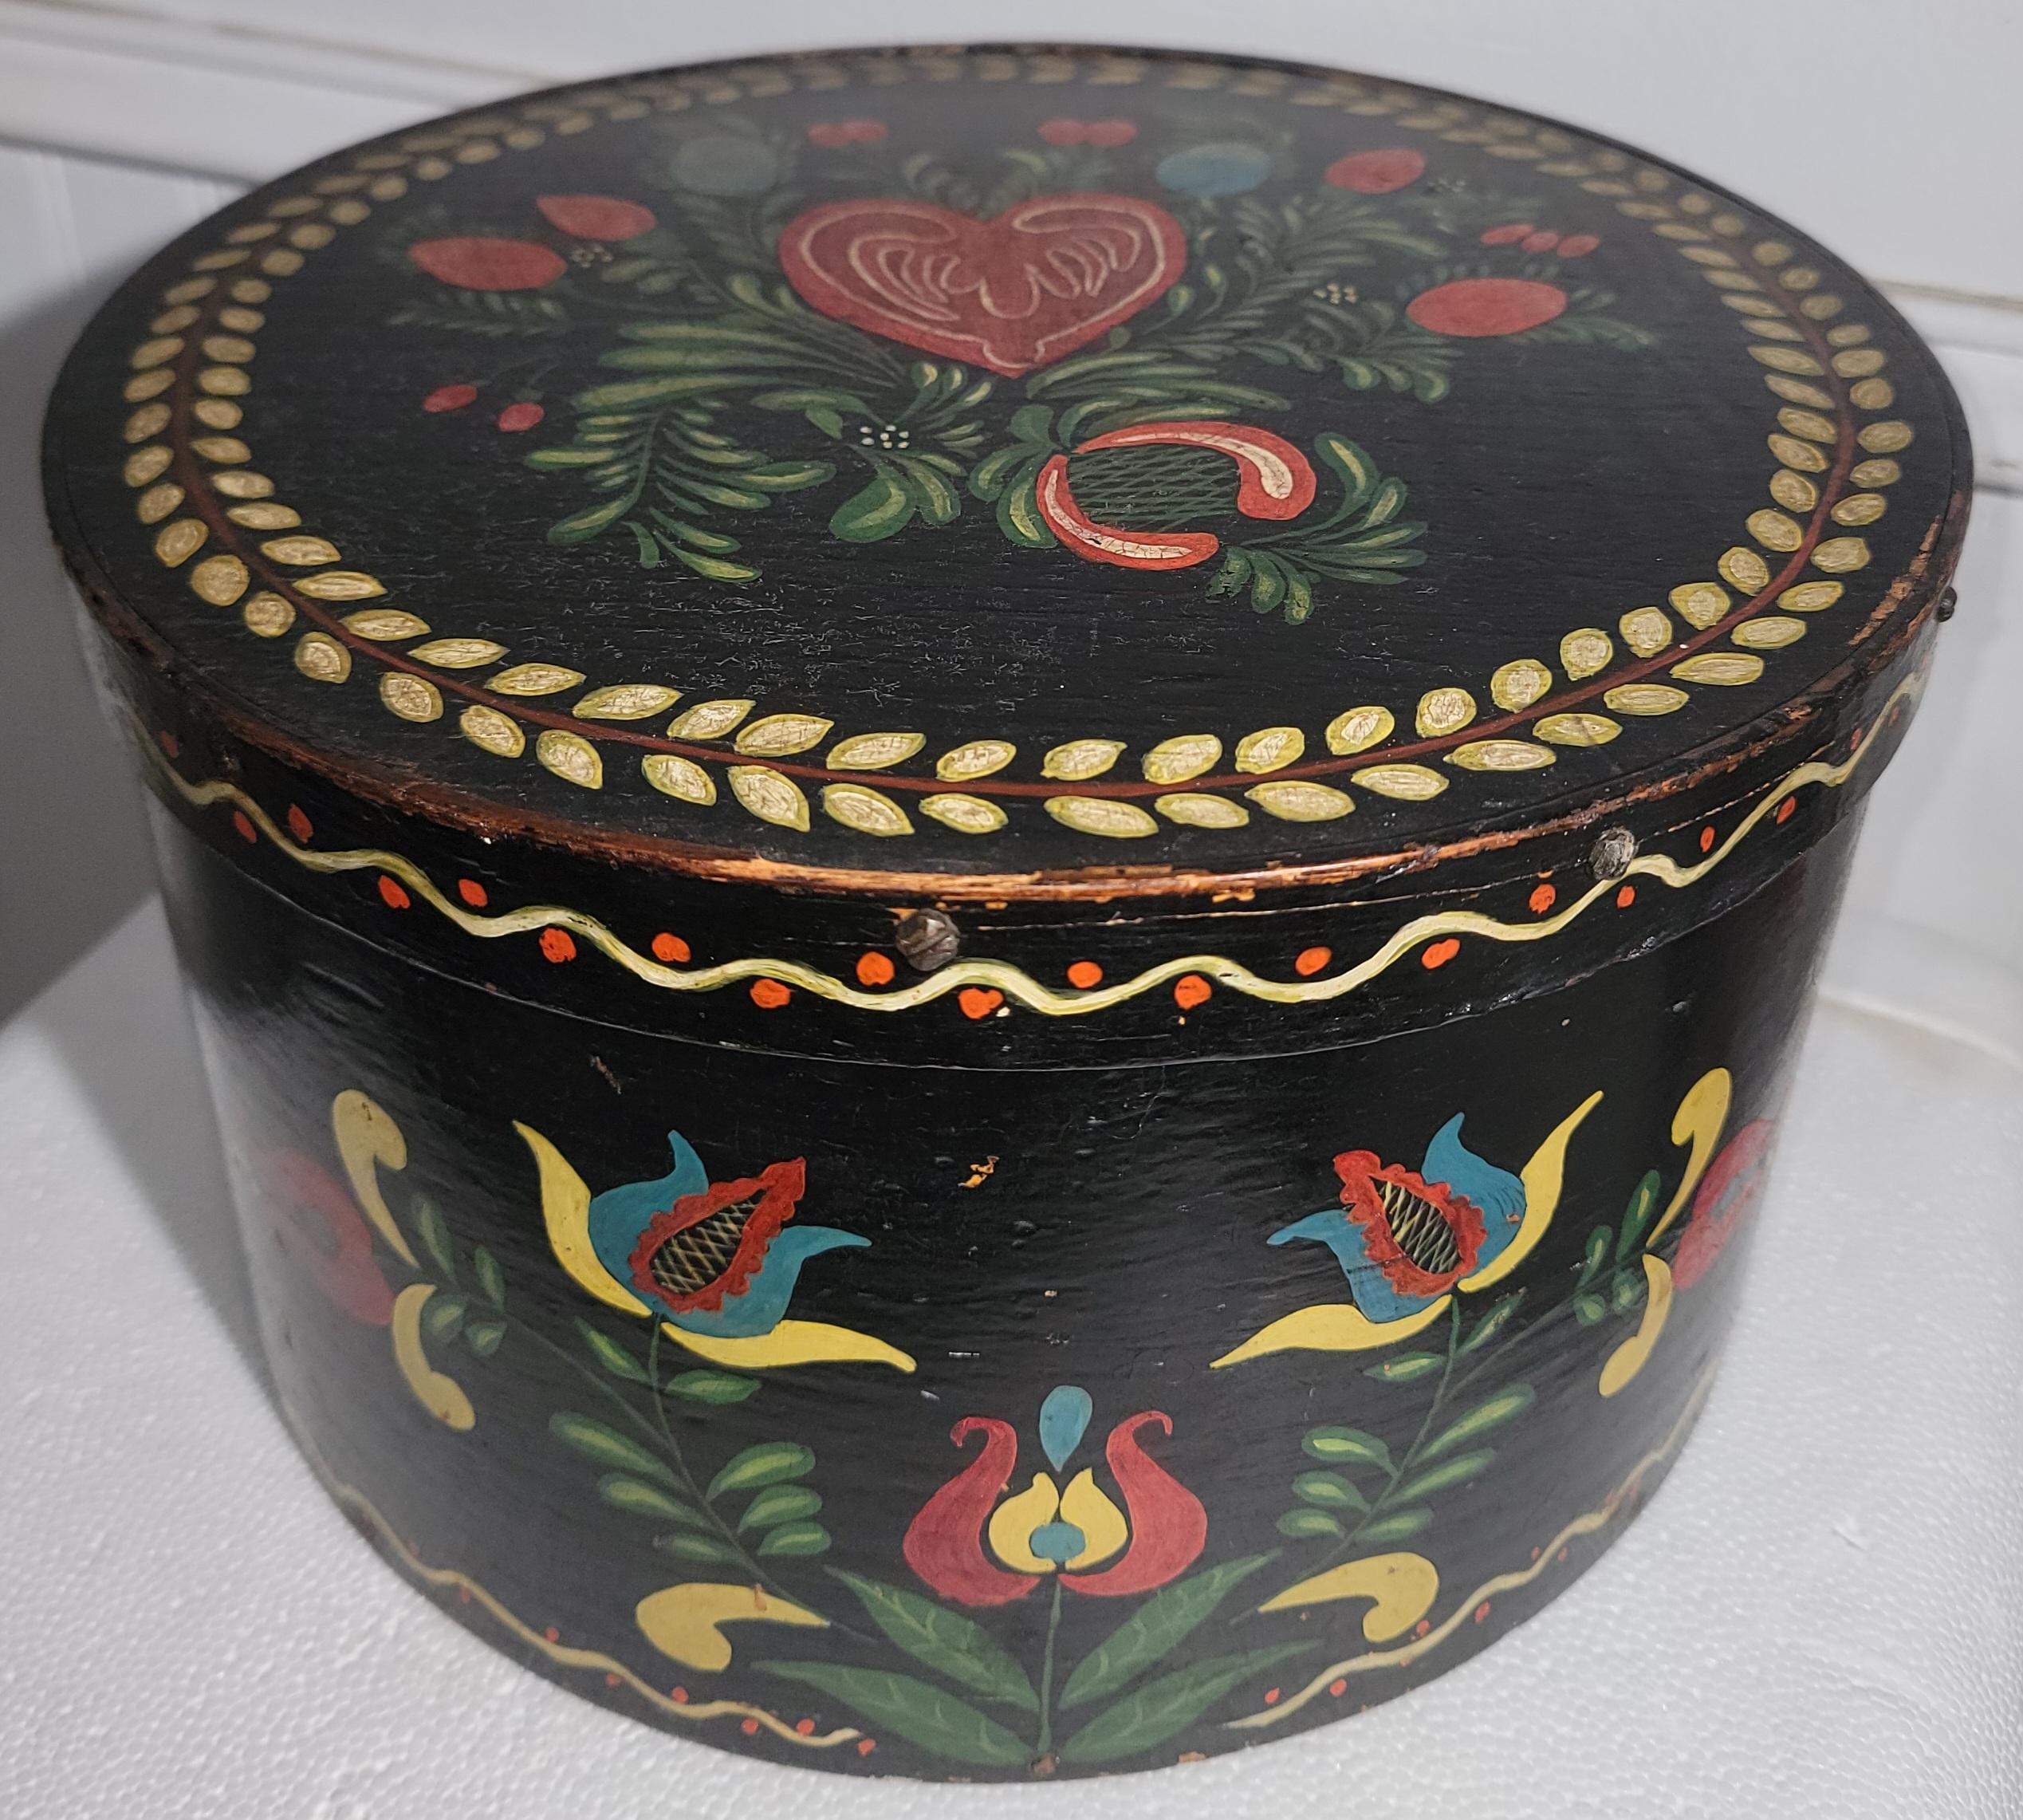 This 19Thc early pantry box was used in the kitchen for feeds and grains. This was paint decorated later in the early 20thc.Looks like a Peter Hunt painted or decorated style. The condition is very good.